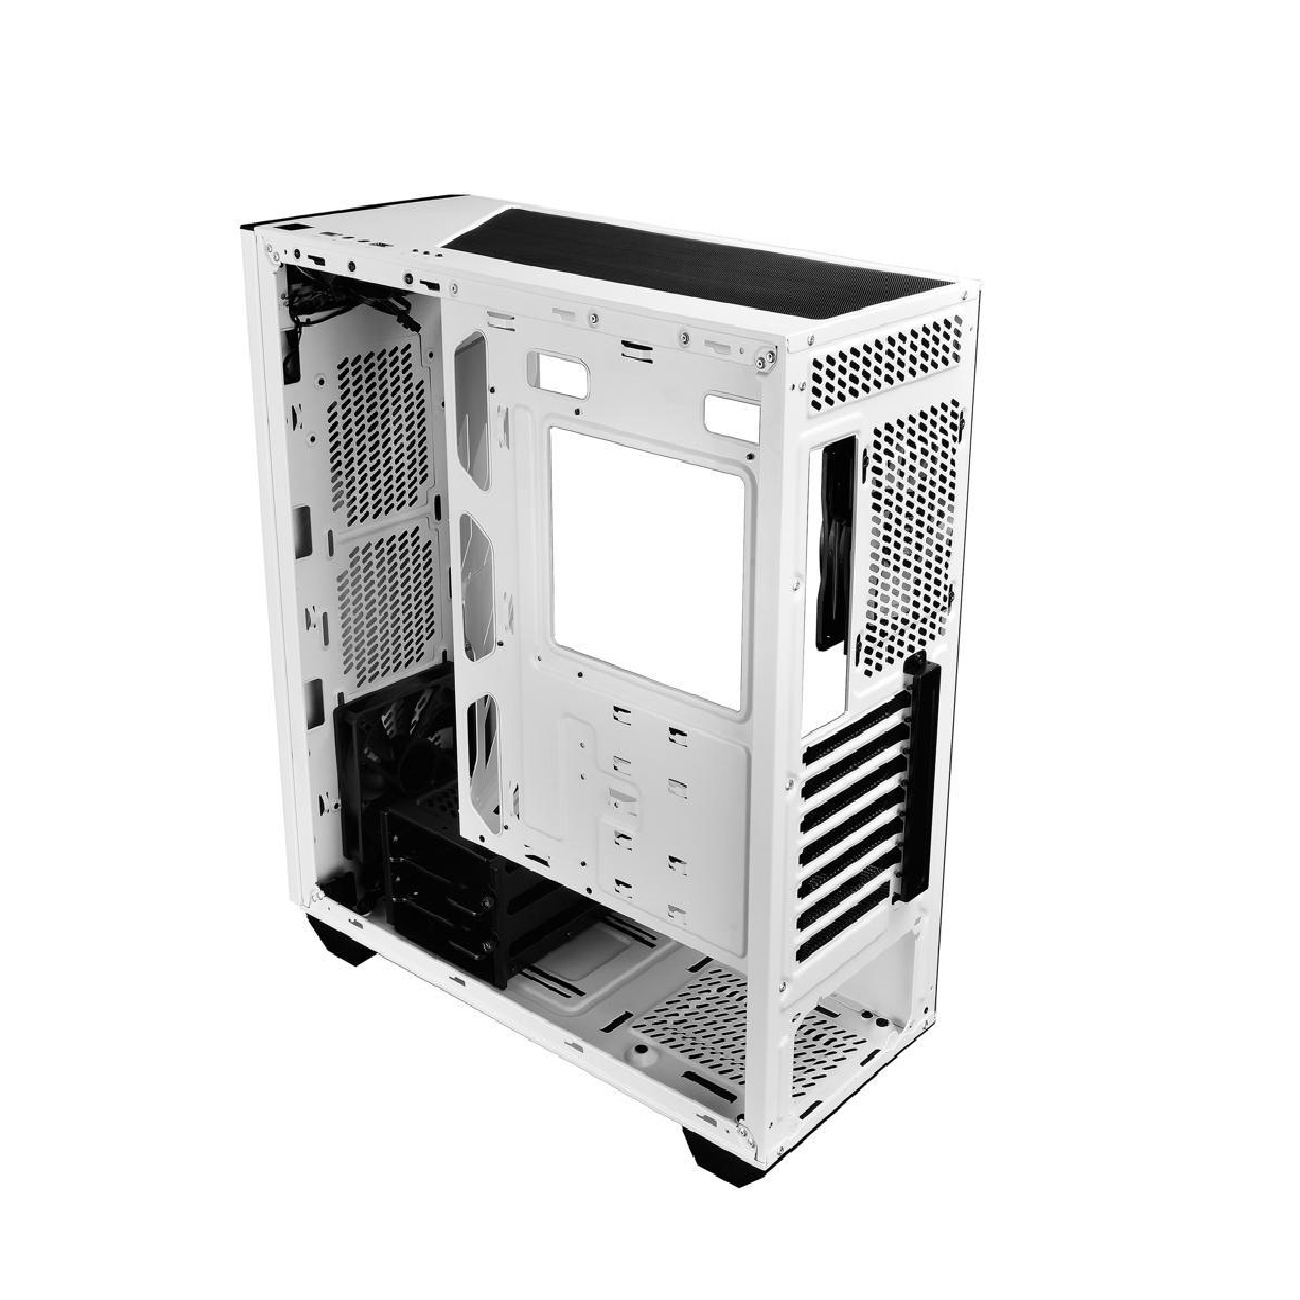 DeepCool Earlkase RGB-WH ATX Mid Tower Case - White - Store 974 | ستور ٩٧٤